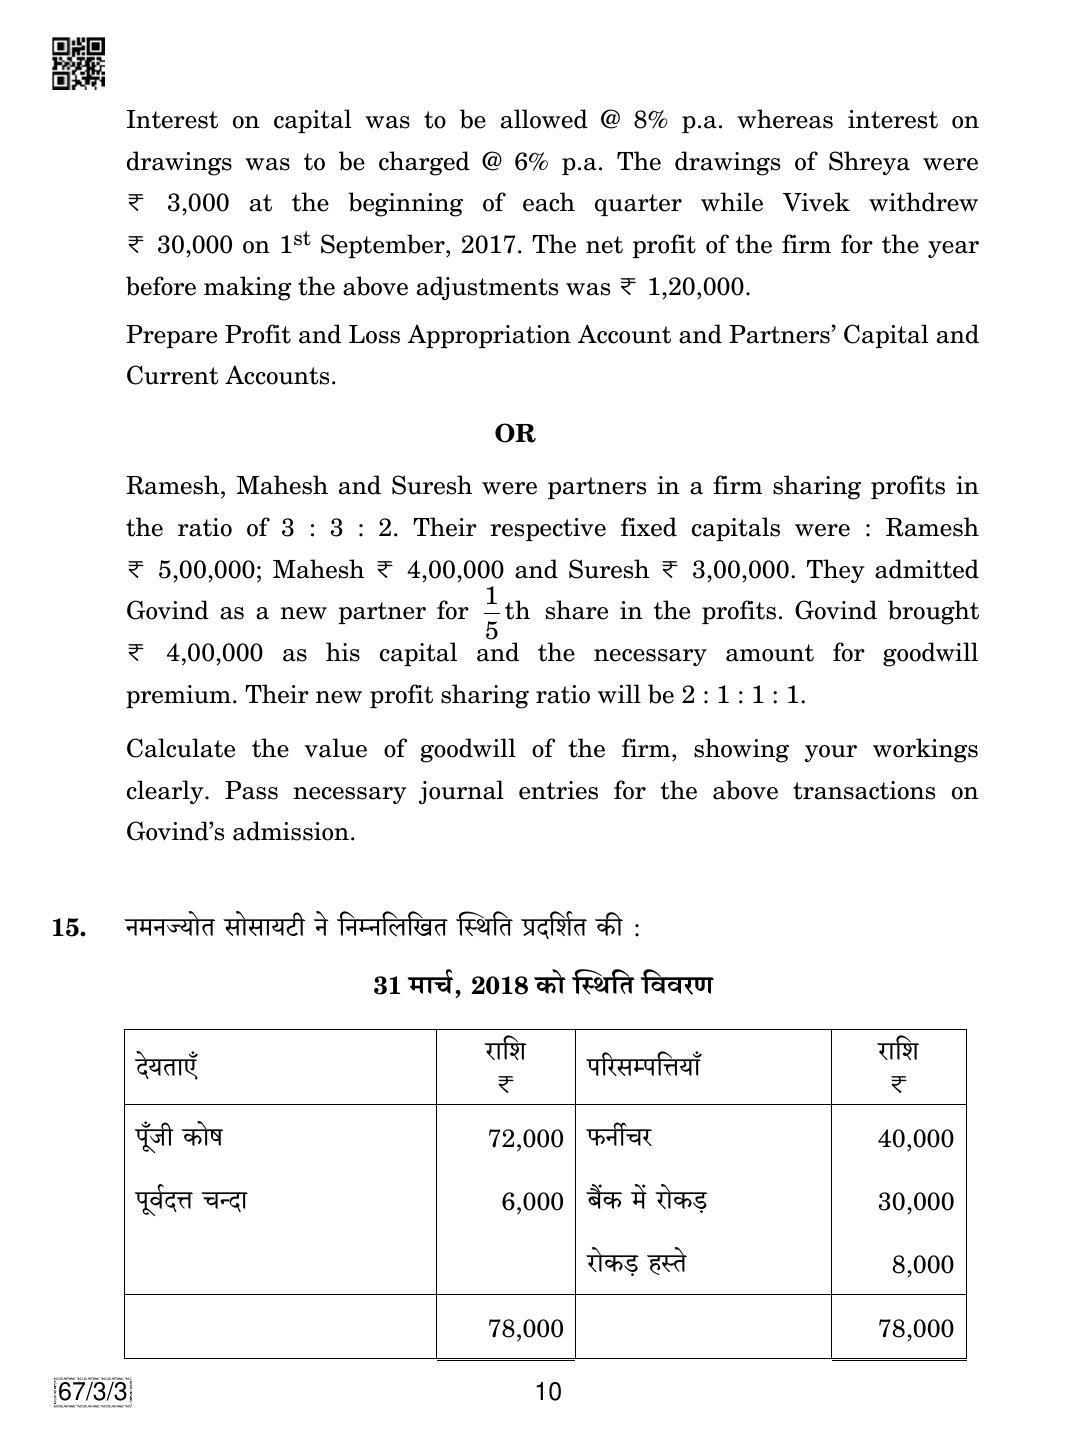 CBSE Class 12 67-3-3 Accountancy 2019 Question Paper - Page 10